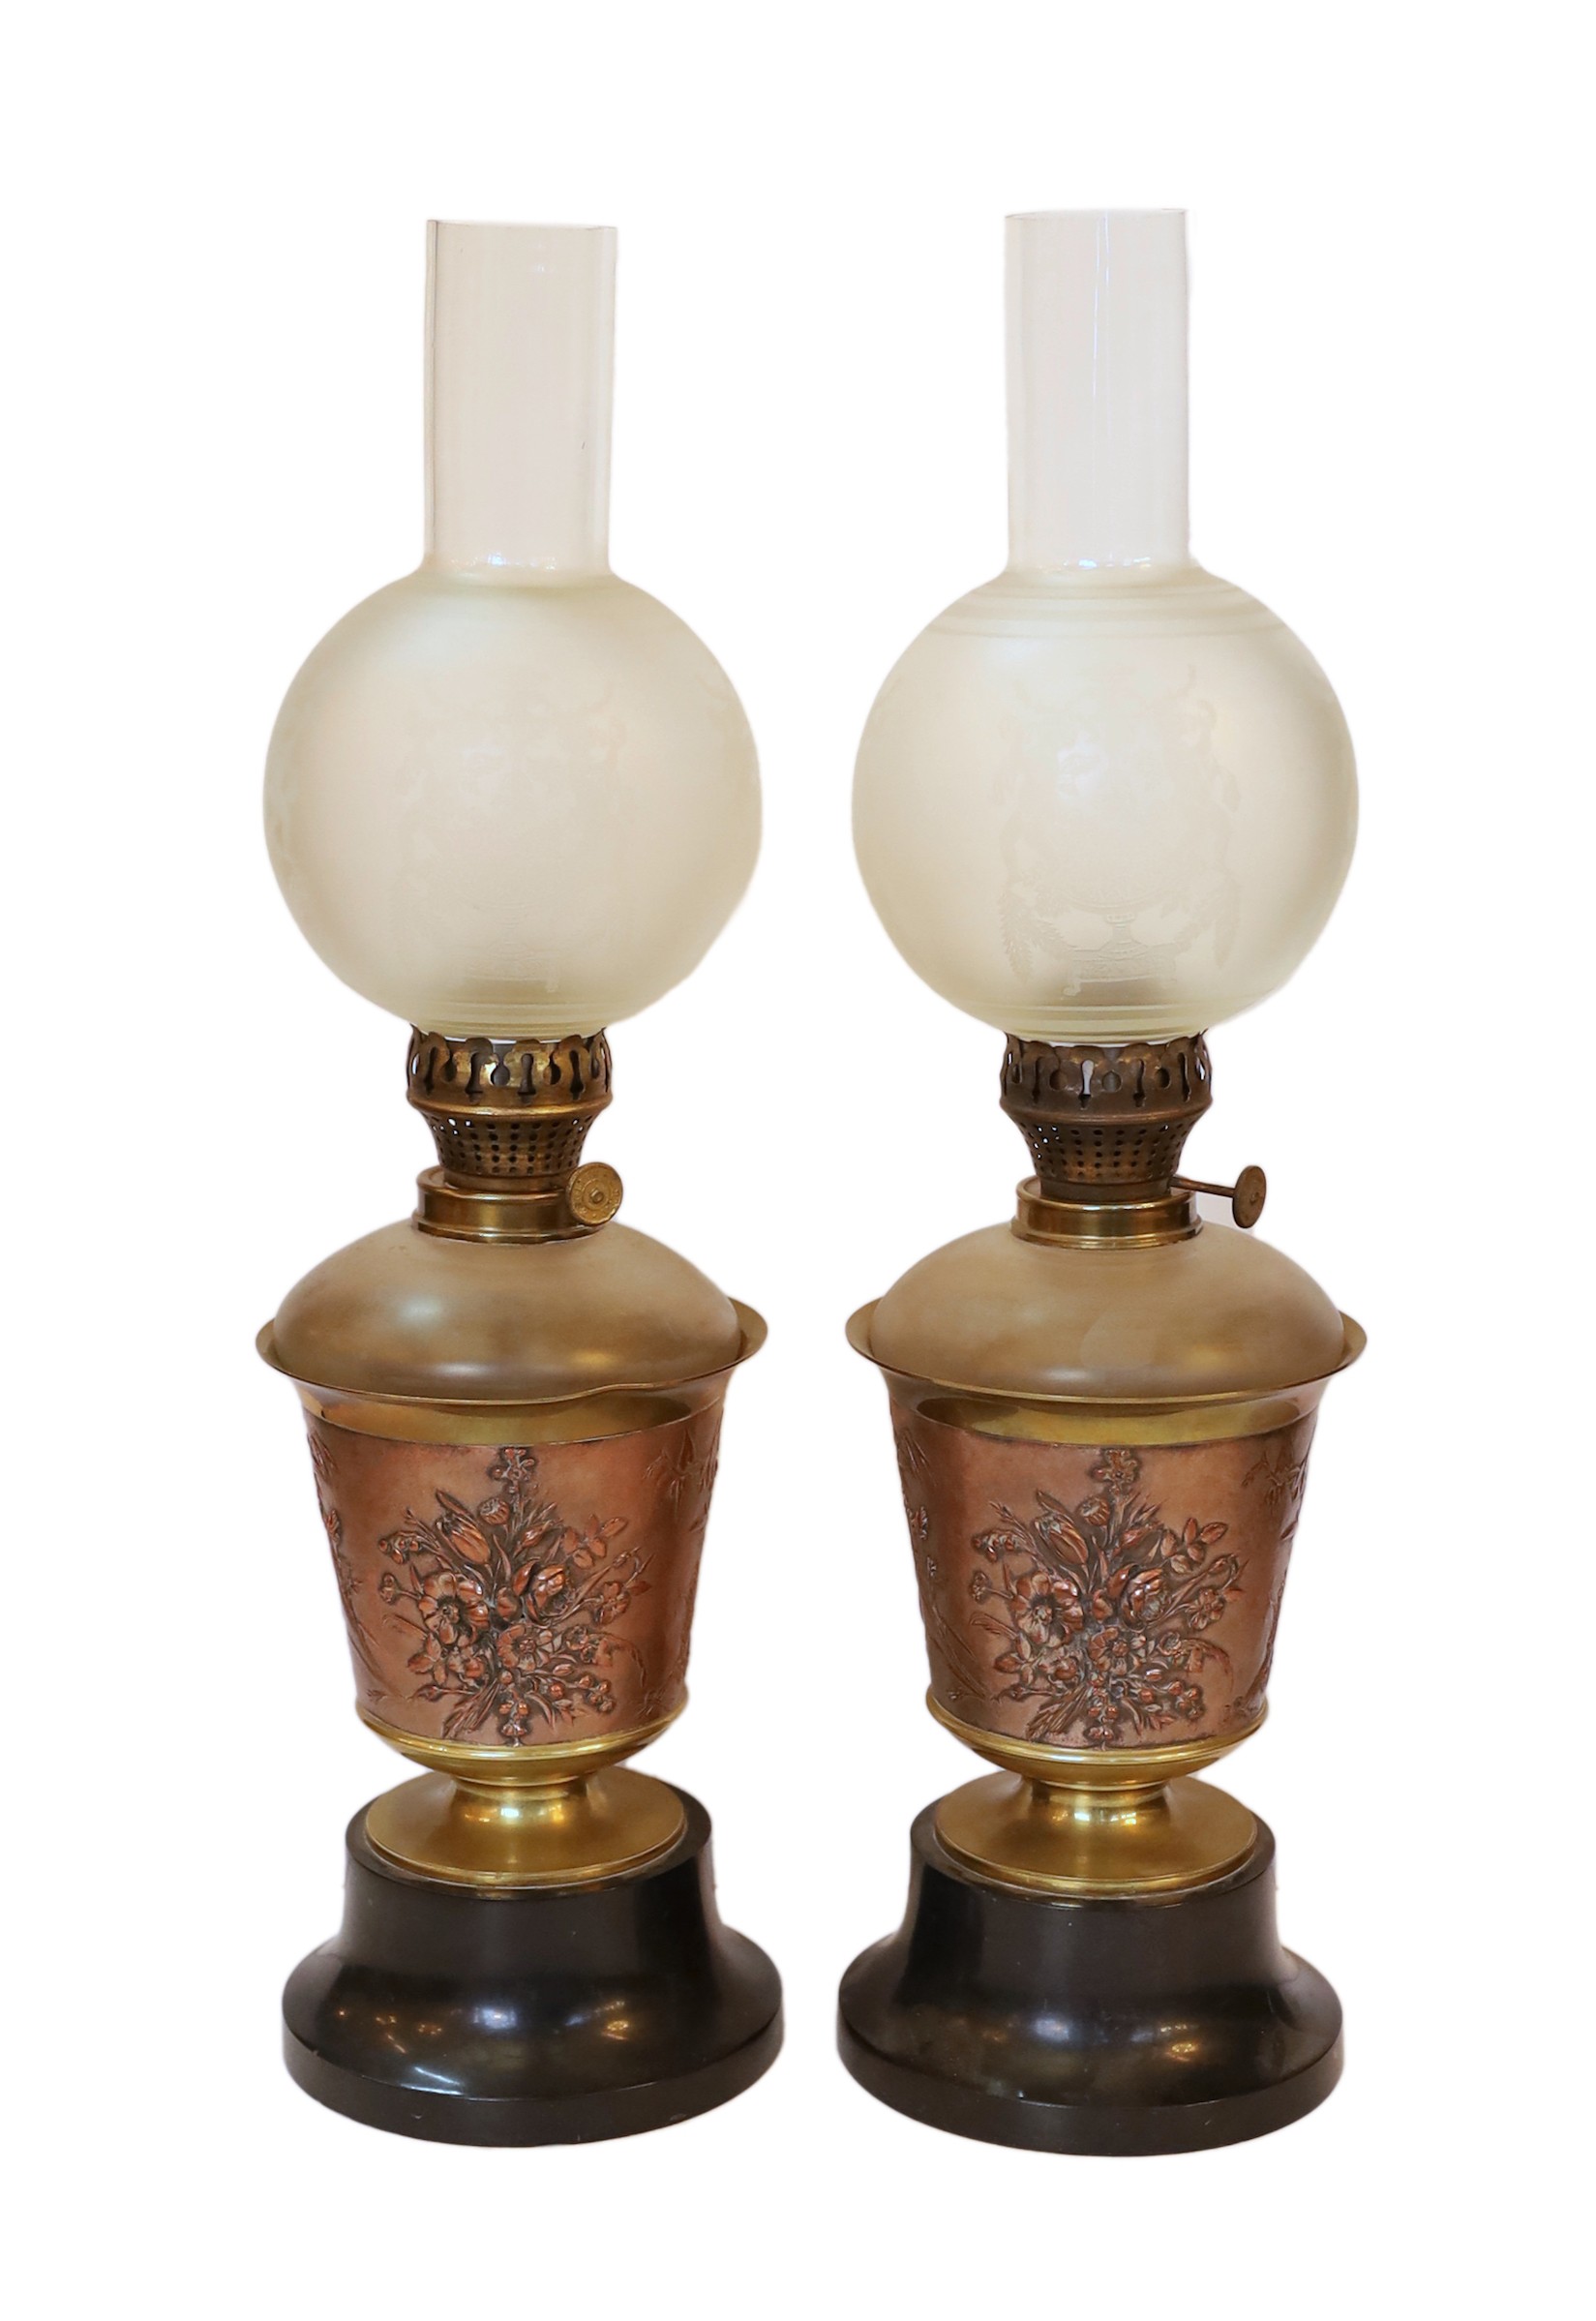 A pair of Victorian copper and brass oil lamps with aesthetic style floral decoration, black marble bases and unusual frosted glass shades with internal flues, height overall 50cm